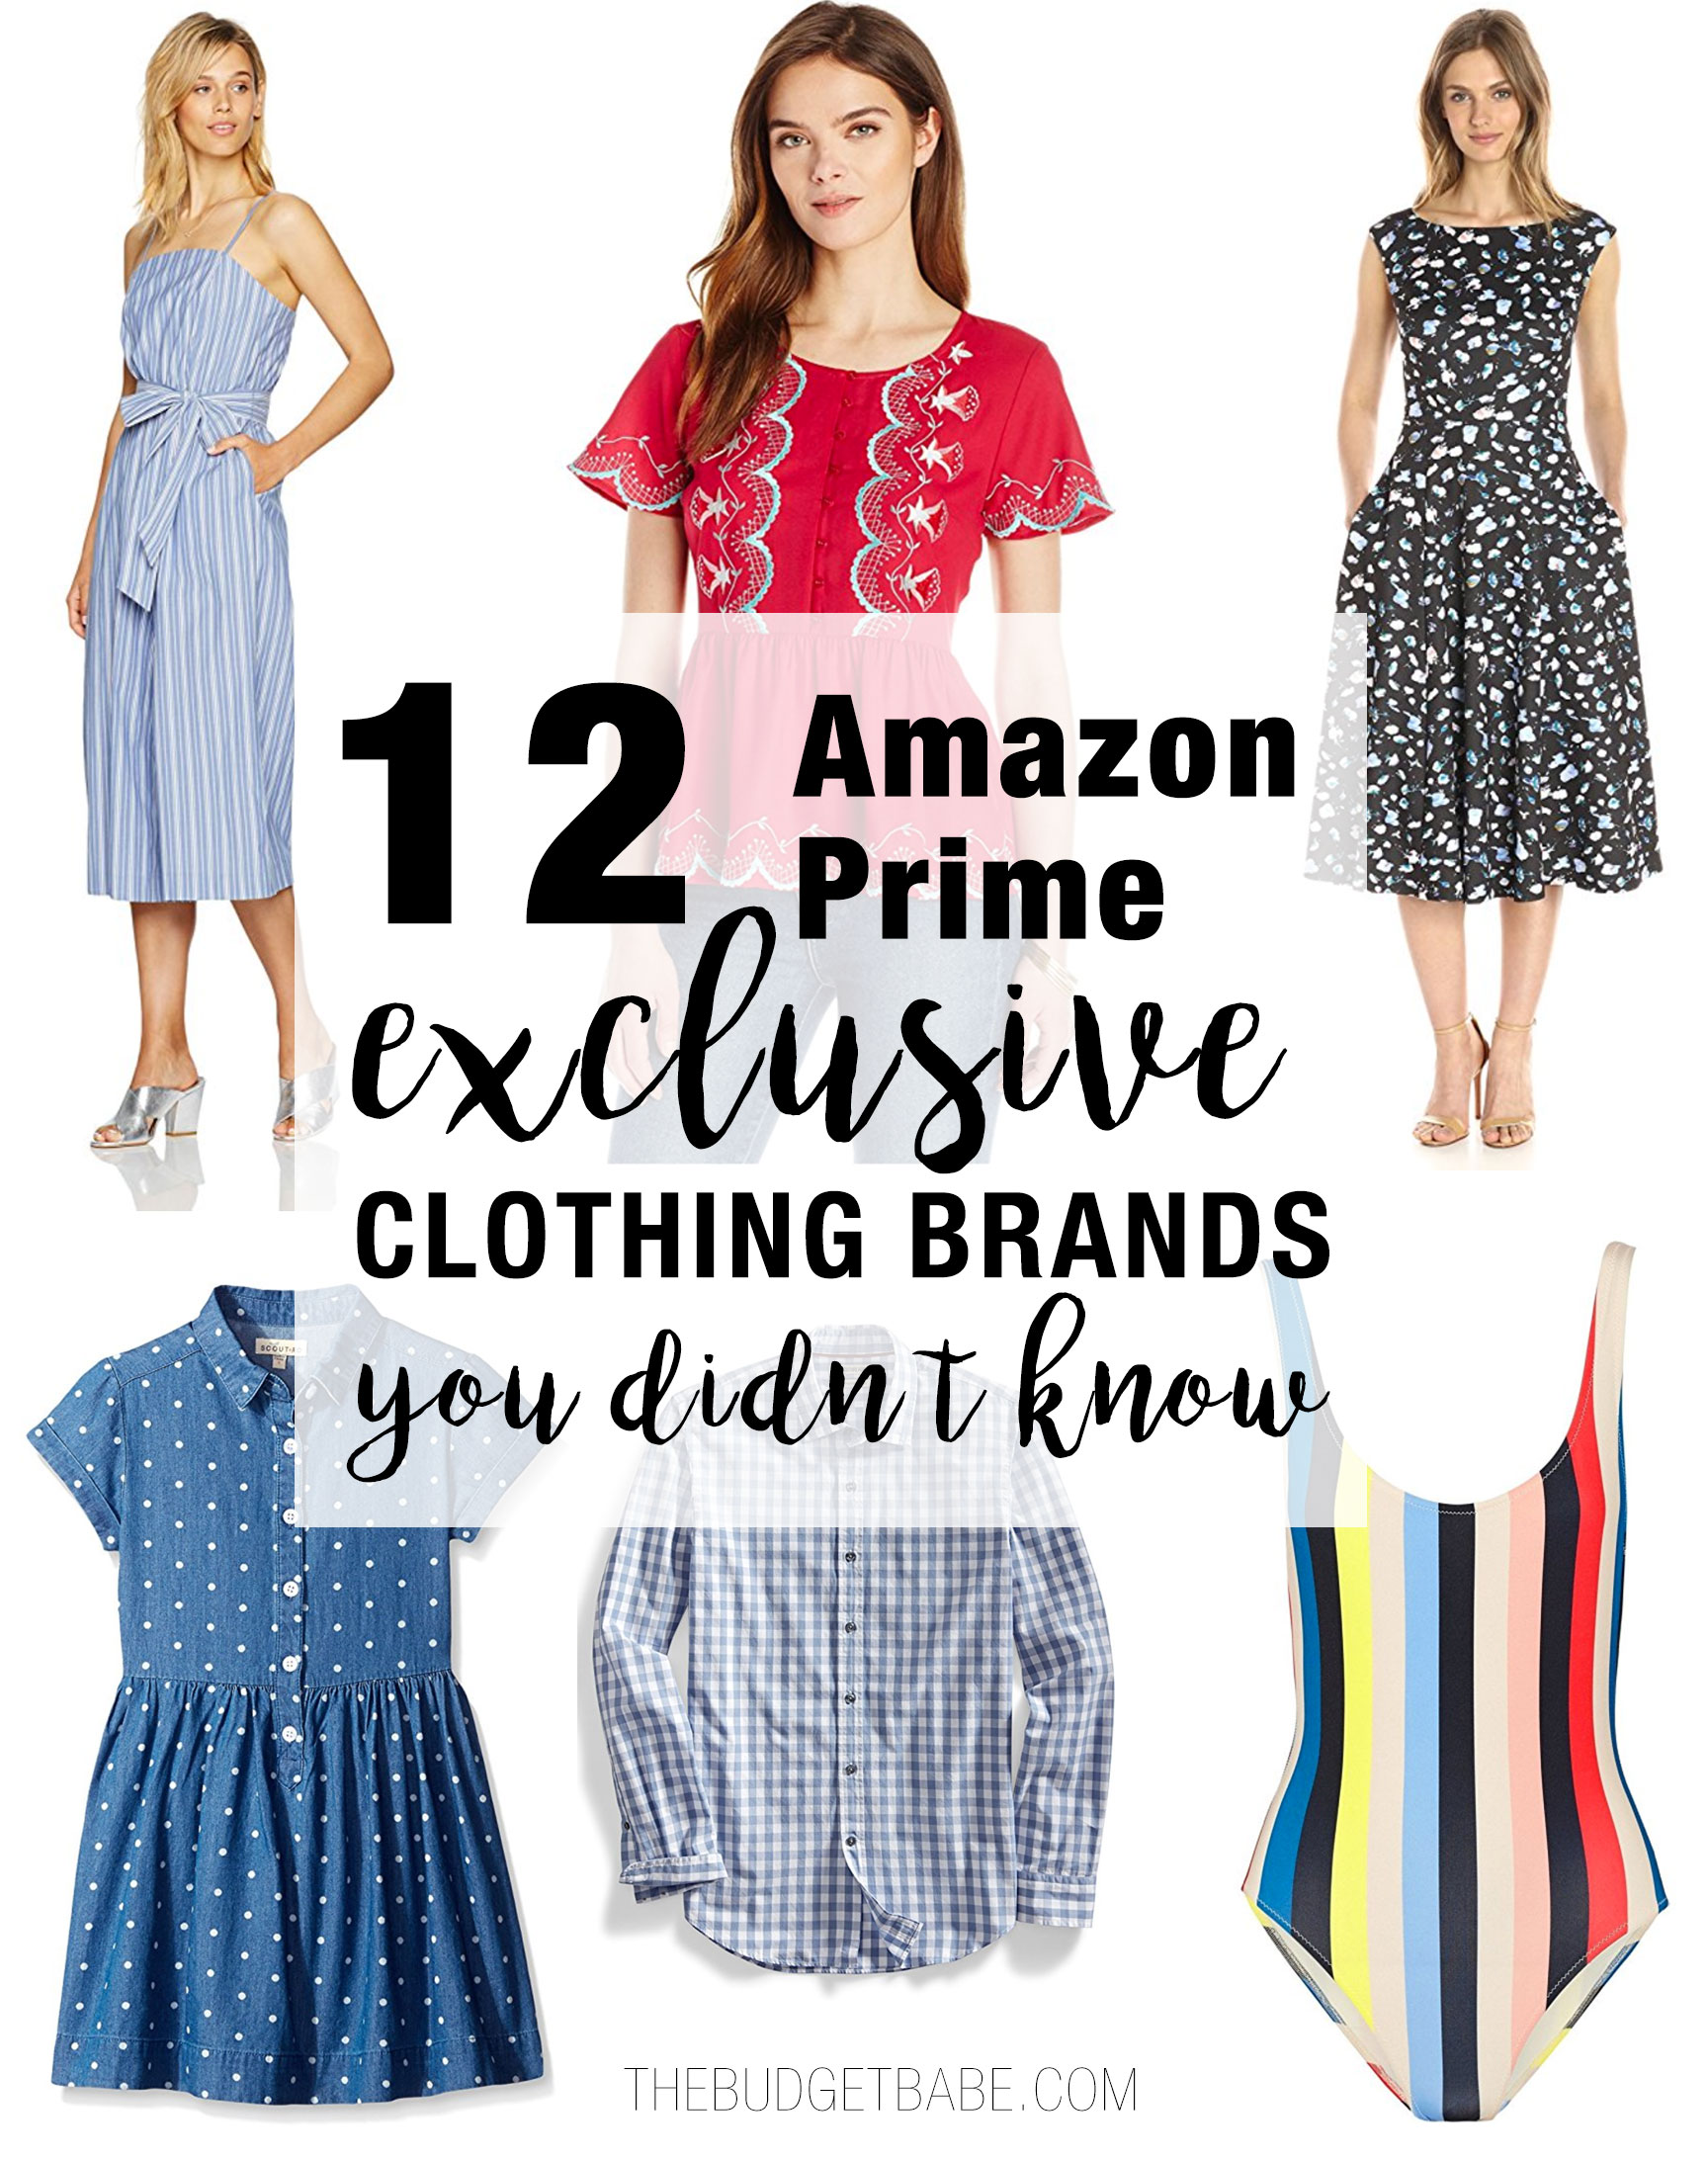 Did you know Amazon's in-house clothing brands aren't for everyone?